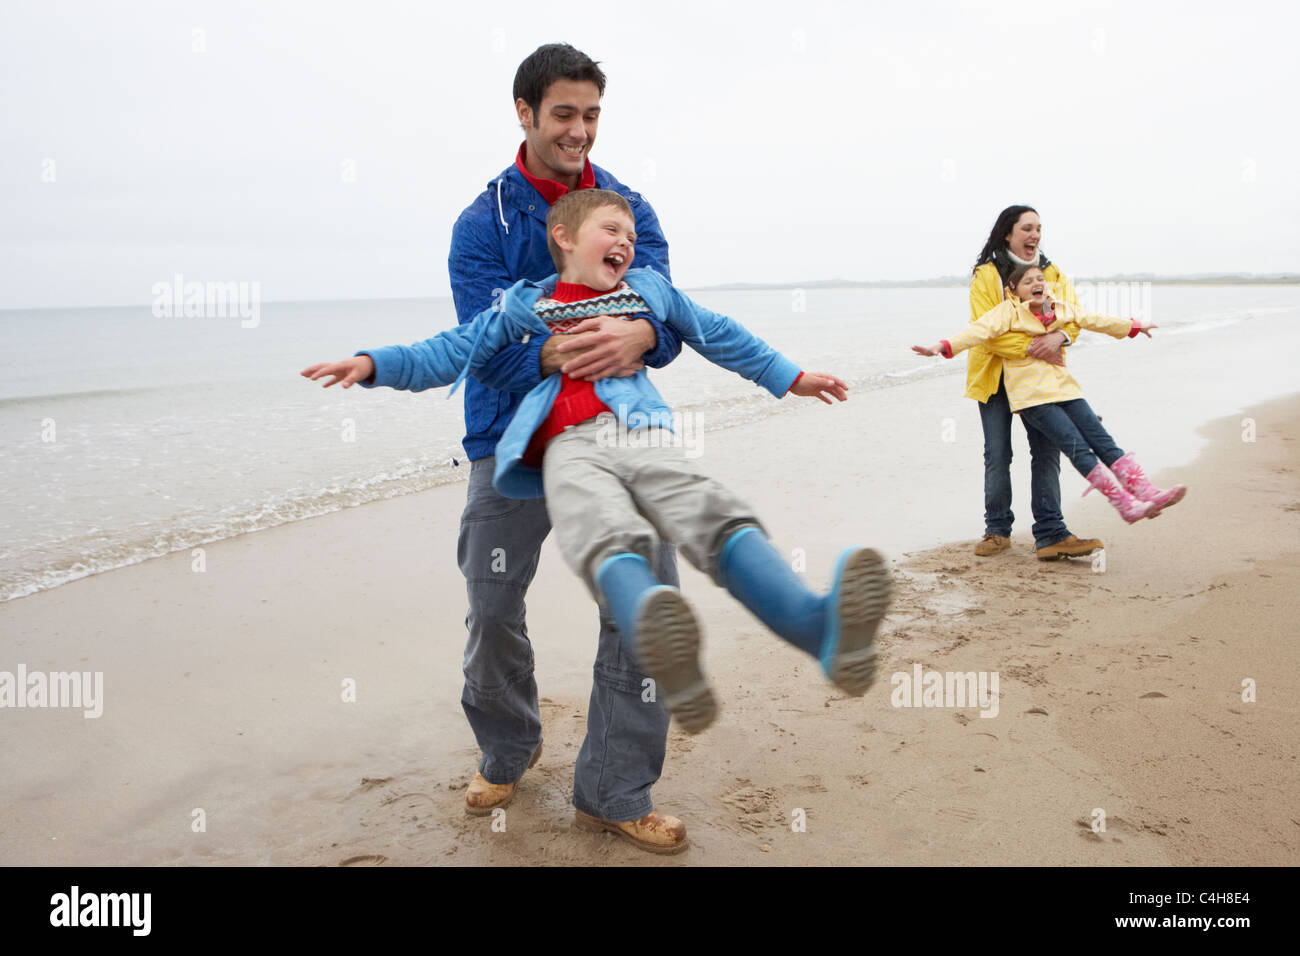 Family playing on beach Banque D'Images